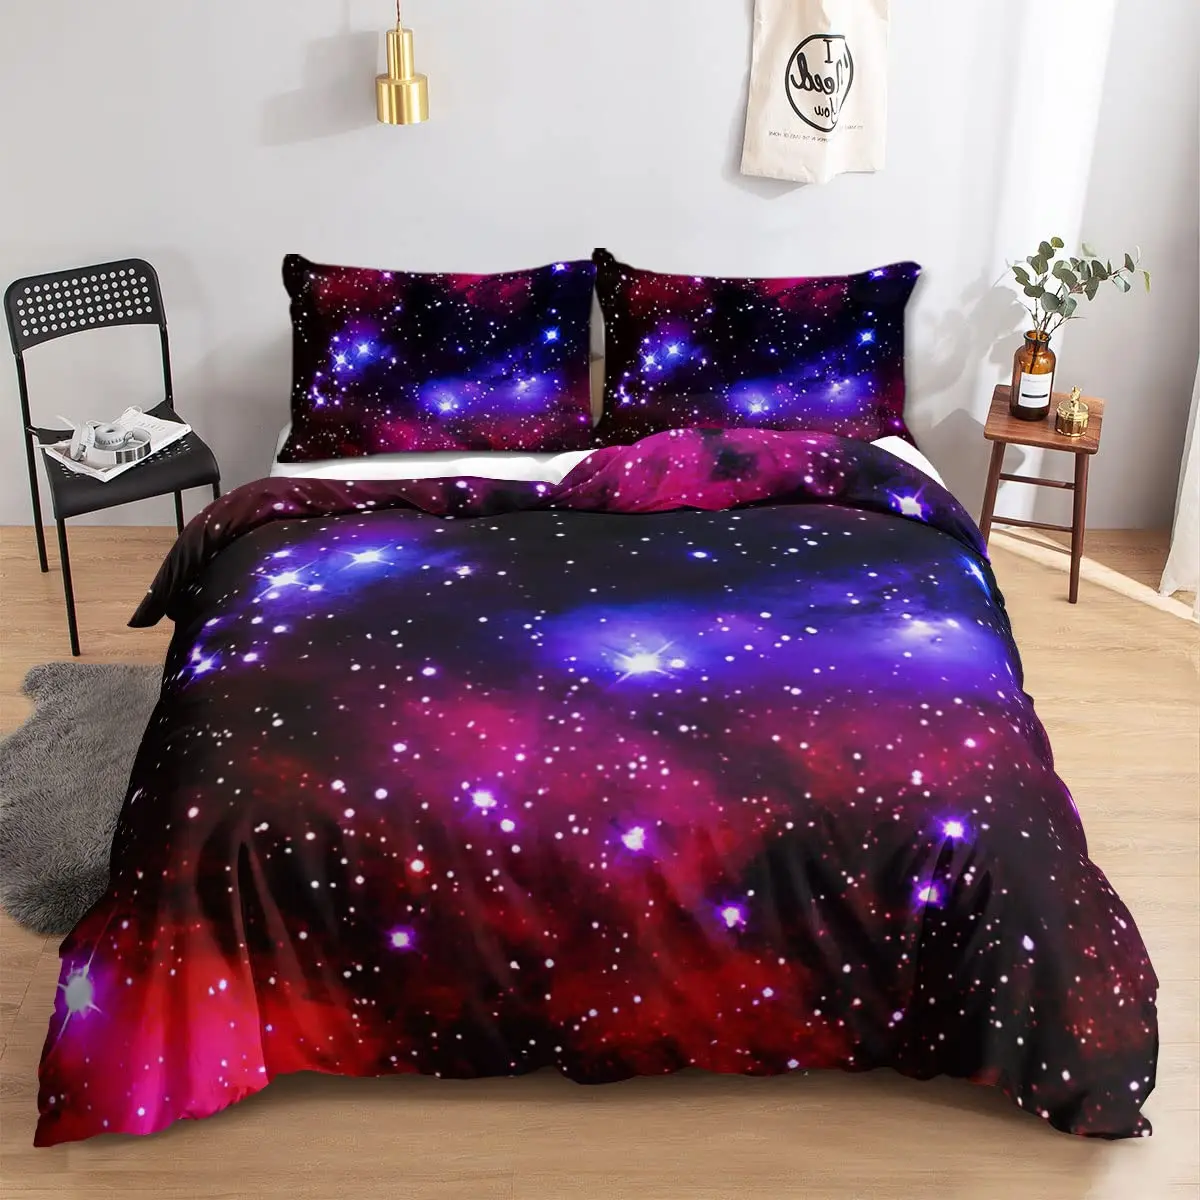 Starry Sky Night Duvet Cover Set Full Queen Size,Cute Star Bedding Sets Black Galaxy Comforter Cover Set with Pillowcases 2/3pcs images - 6